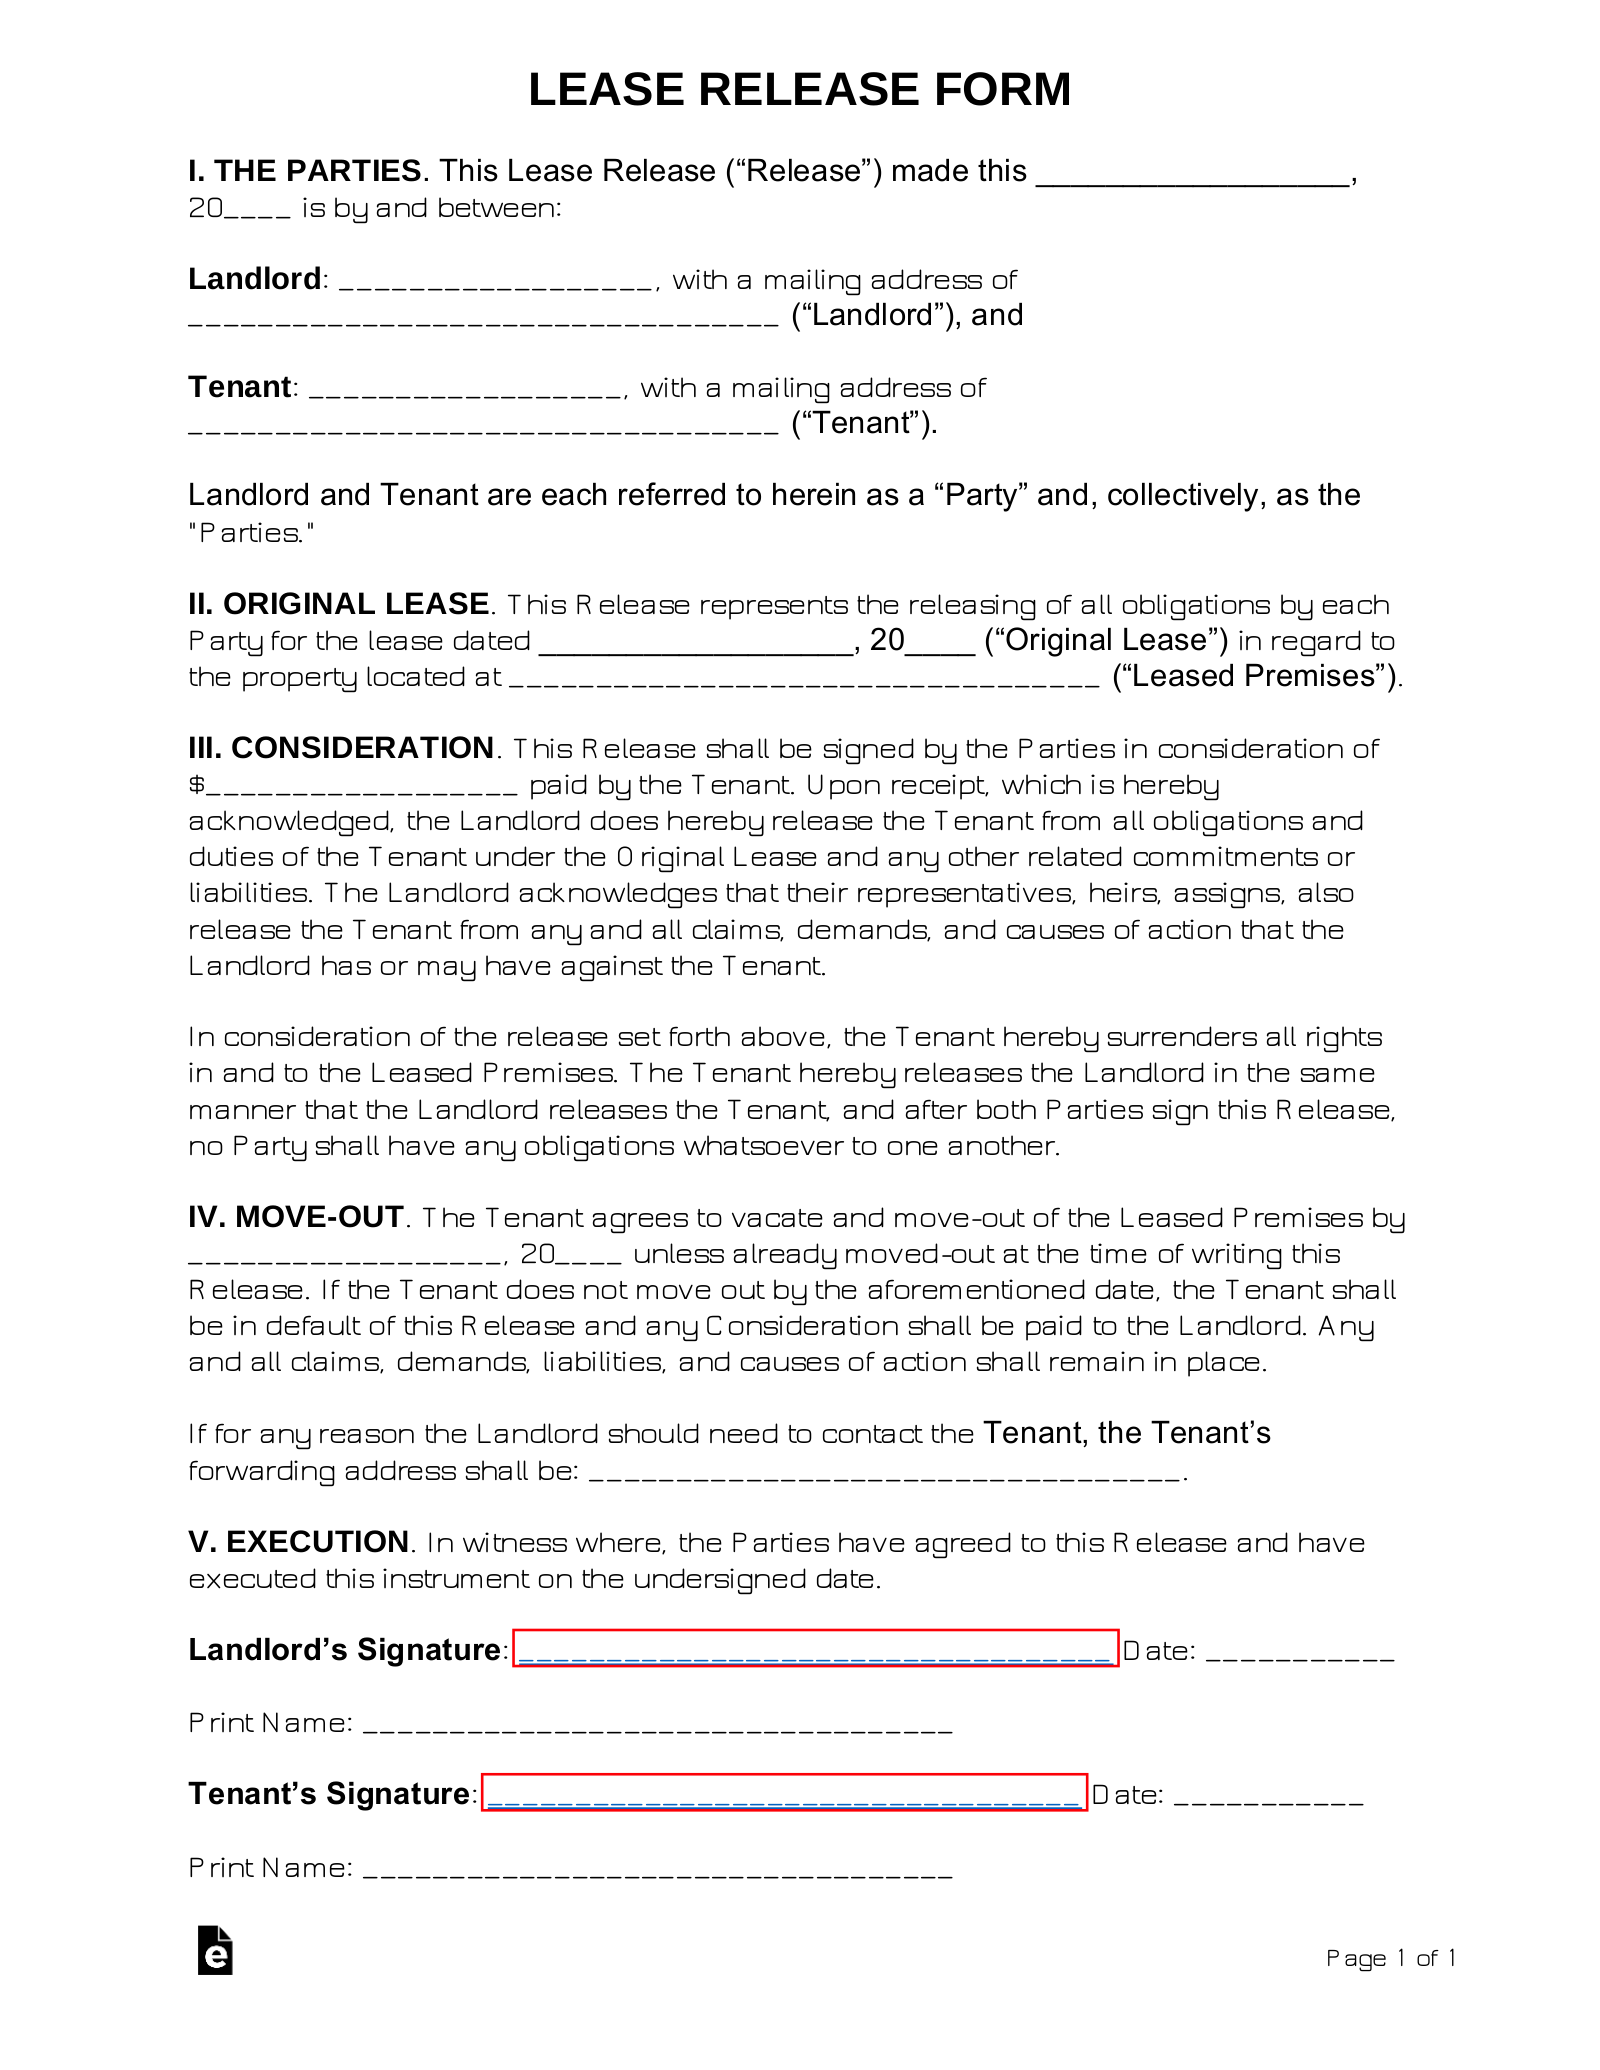 Lease Agreement RELEASE Form | Sample